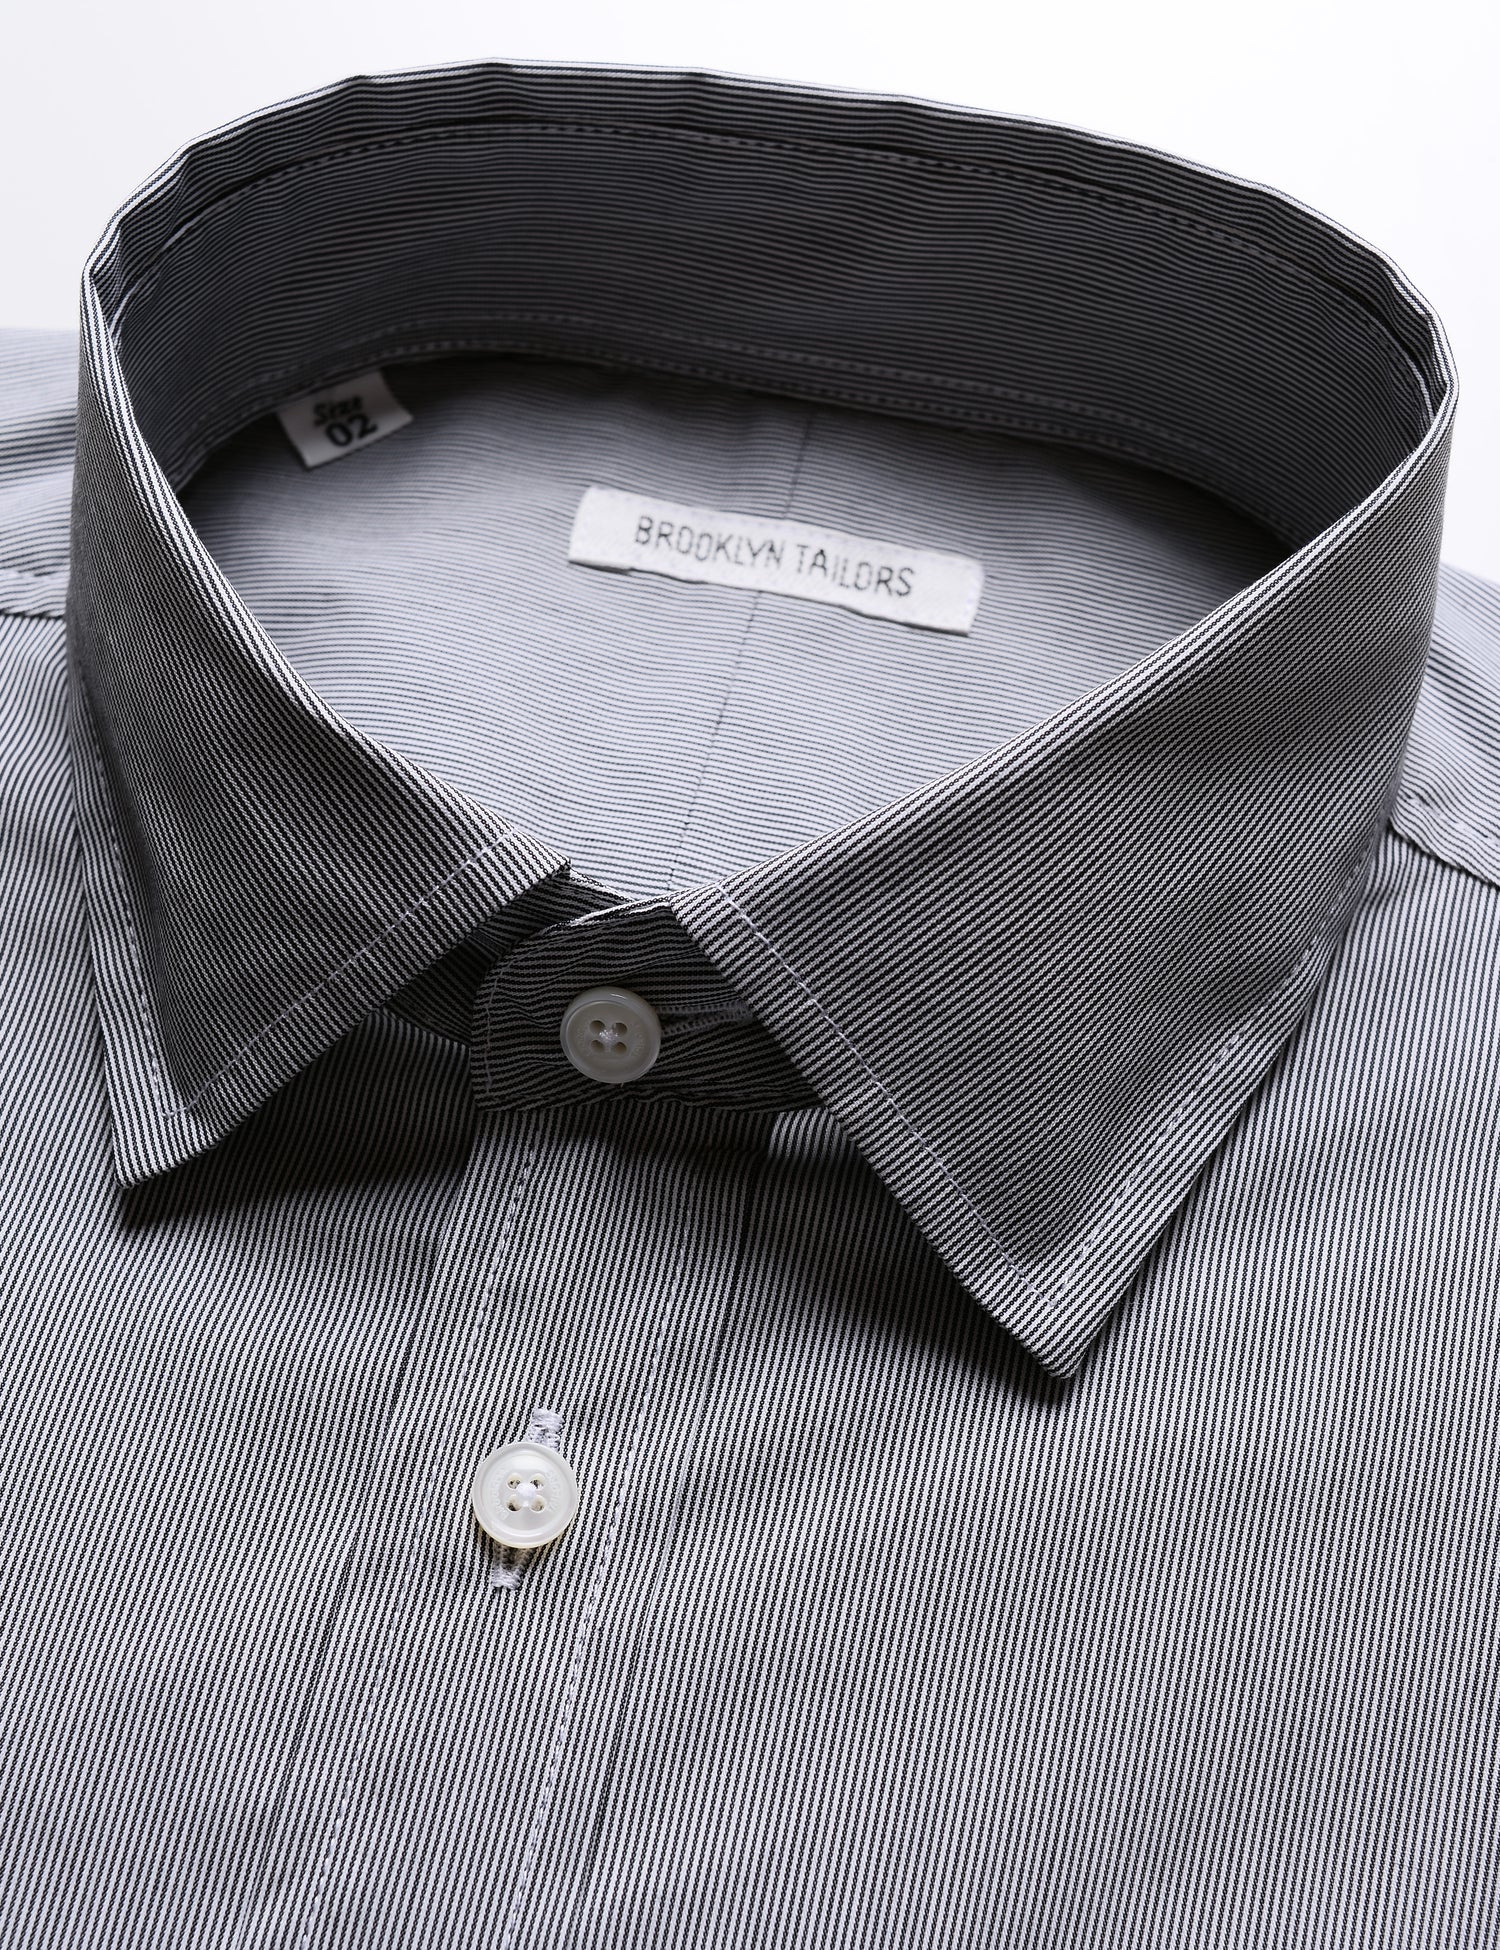 Detail shot of collar, buttons, and fabric pattern on Brooklyn Tailors BKT20 Slim Dress Shirt in Hairline Stripe - Granite